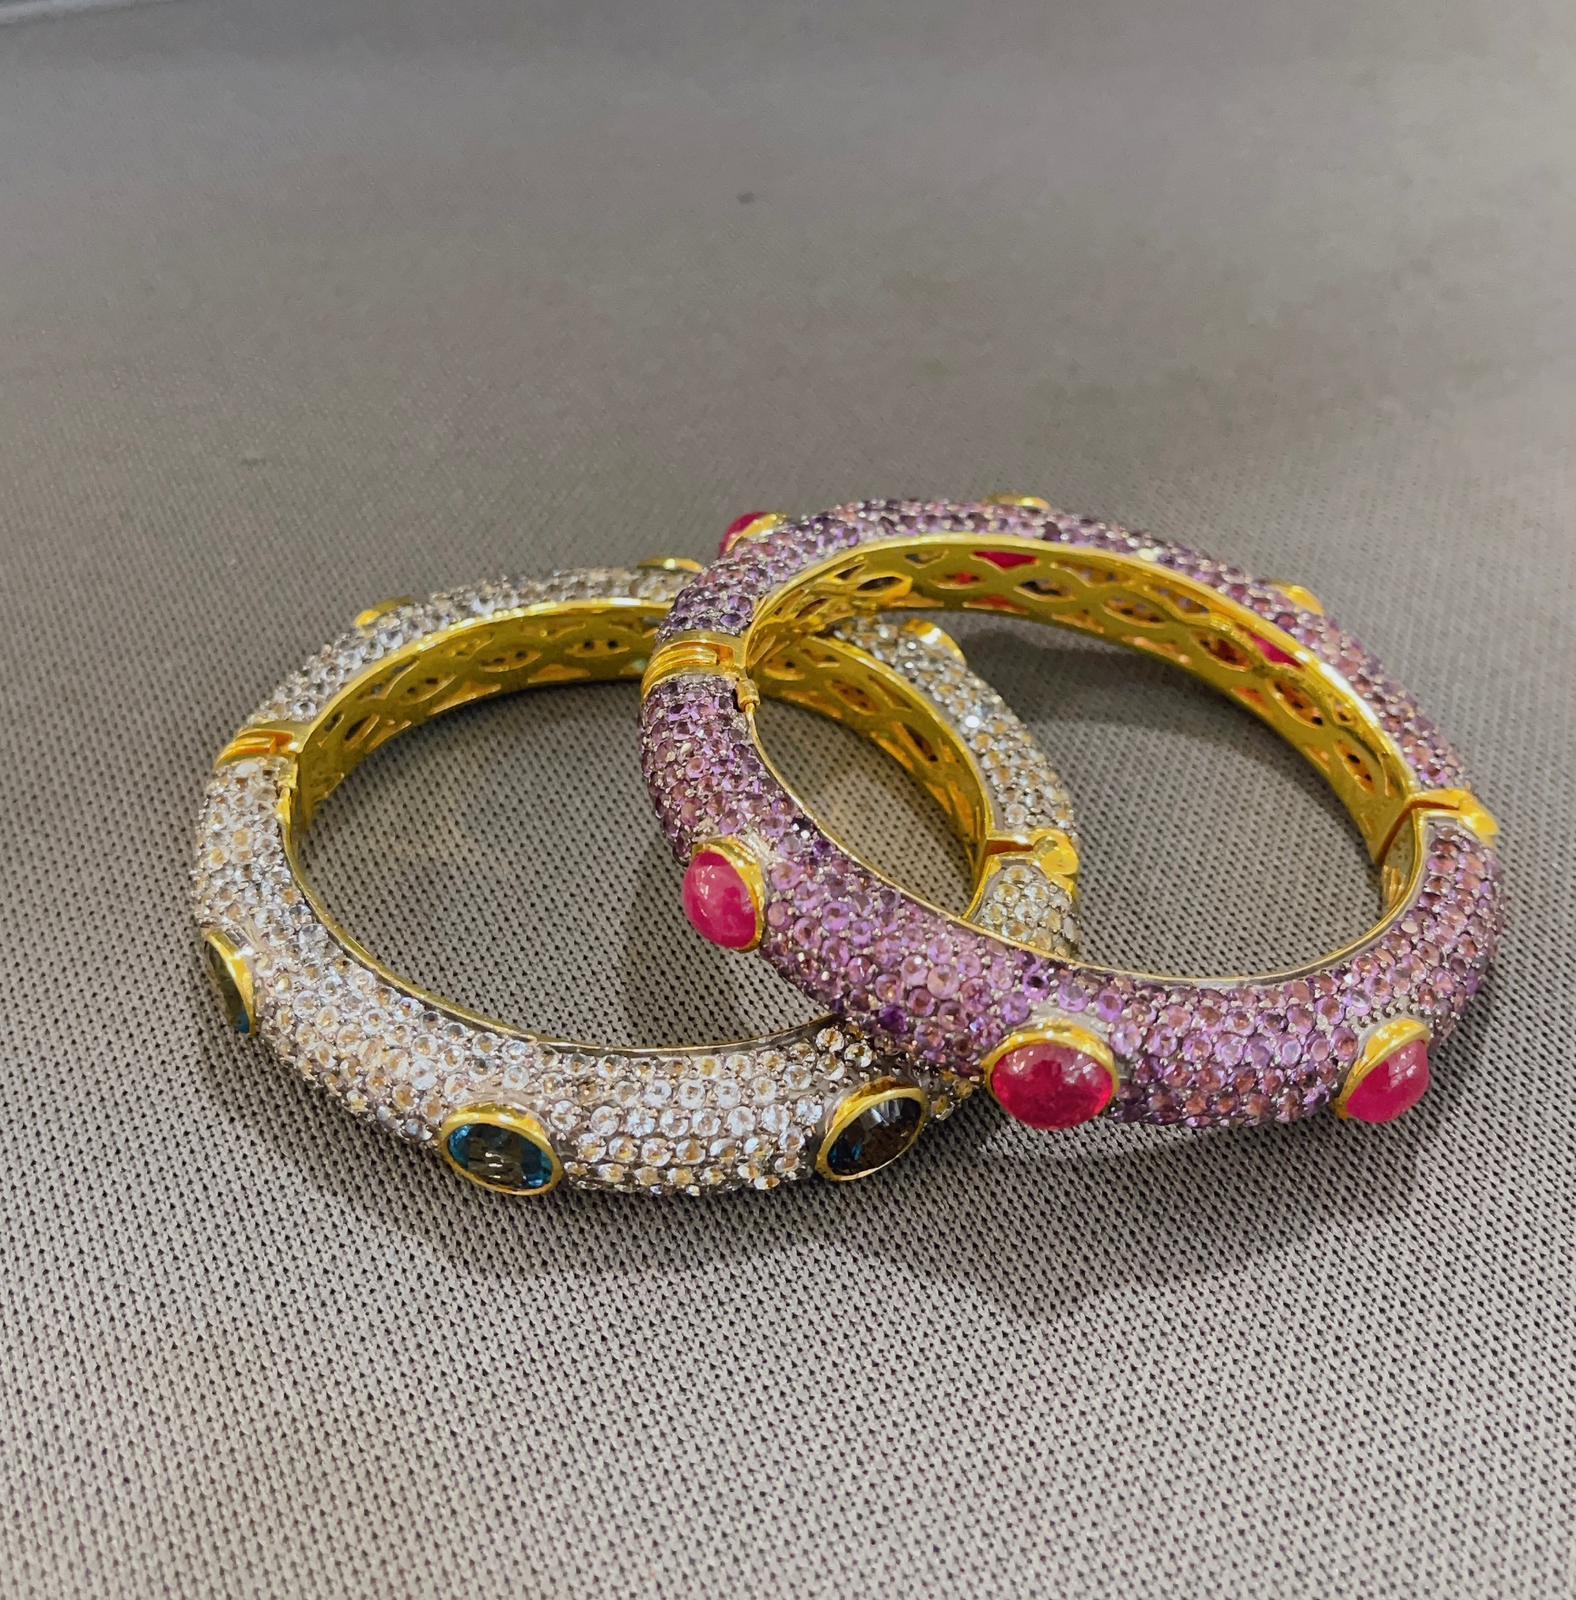 Bochic “Capri” Red Ruby & Purple Amethyst Bangle Set in 22k Gold & Silver In New Condition For Sale In New York, NY